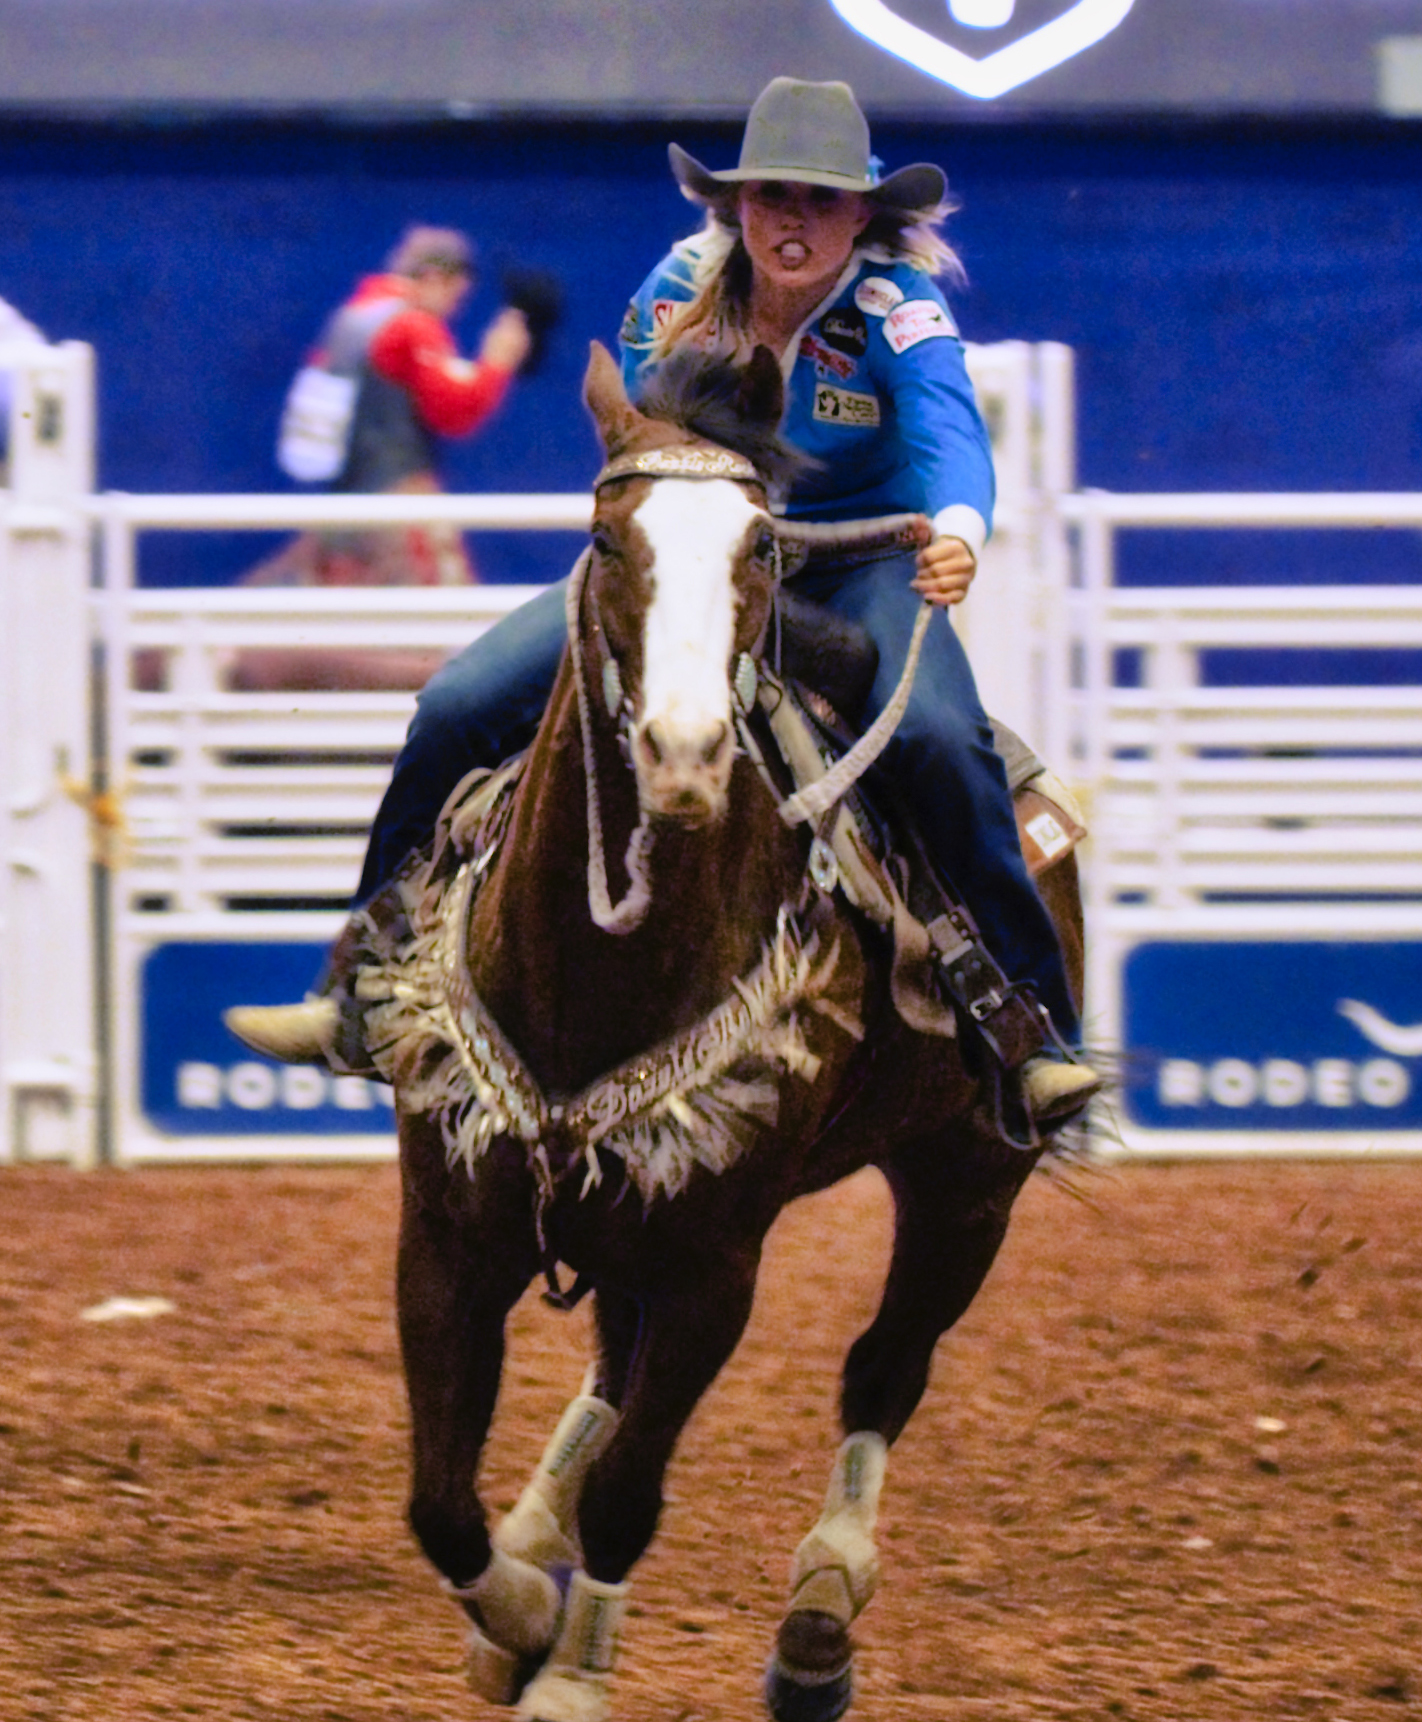 A barrel racer competes at Rodeo Austin in 2017. Original video documentaries throughout the exhibition capture the excitement of rodeo events across the state.